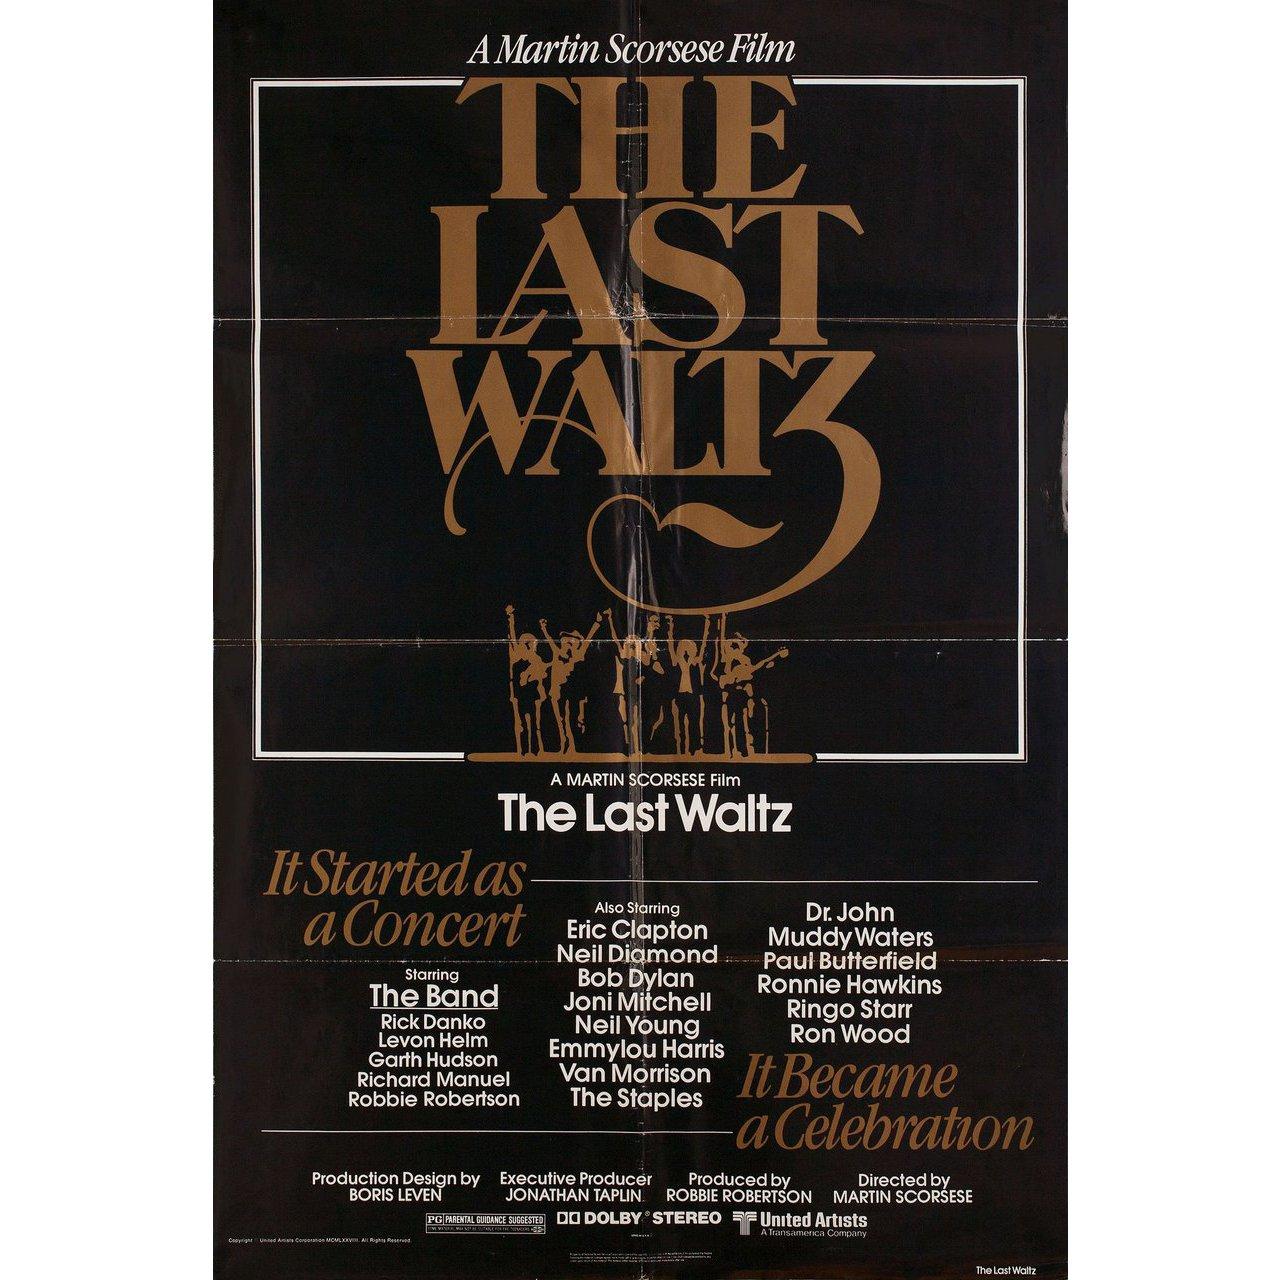 Original 1978 U.S. one sheet poster for the documentary film The Last Waltz directed by Martin Scorsese with The Band / Rick Danko / Robbie Robertson / Richard Manuel / Bob Dylan / Neil Young / Eric Clapton / Joni Mitchell. Good-very good condition,